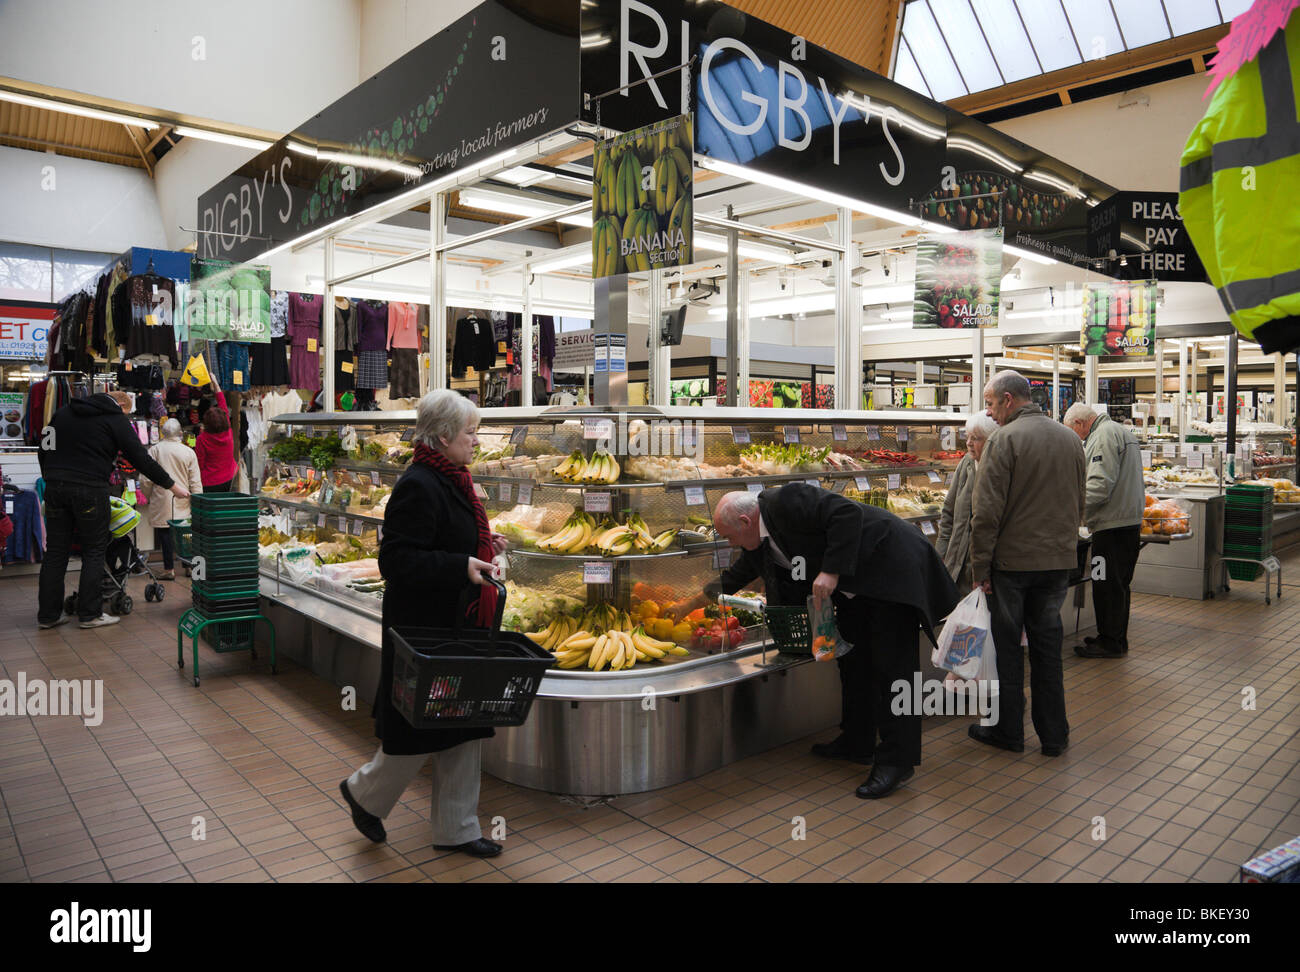 Warrington, Cheshire, England, Britain. Fruit and vegetables stall in indoor market hall Stock Photo